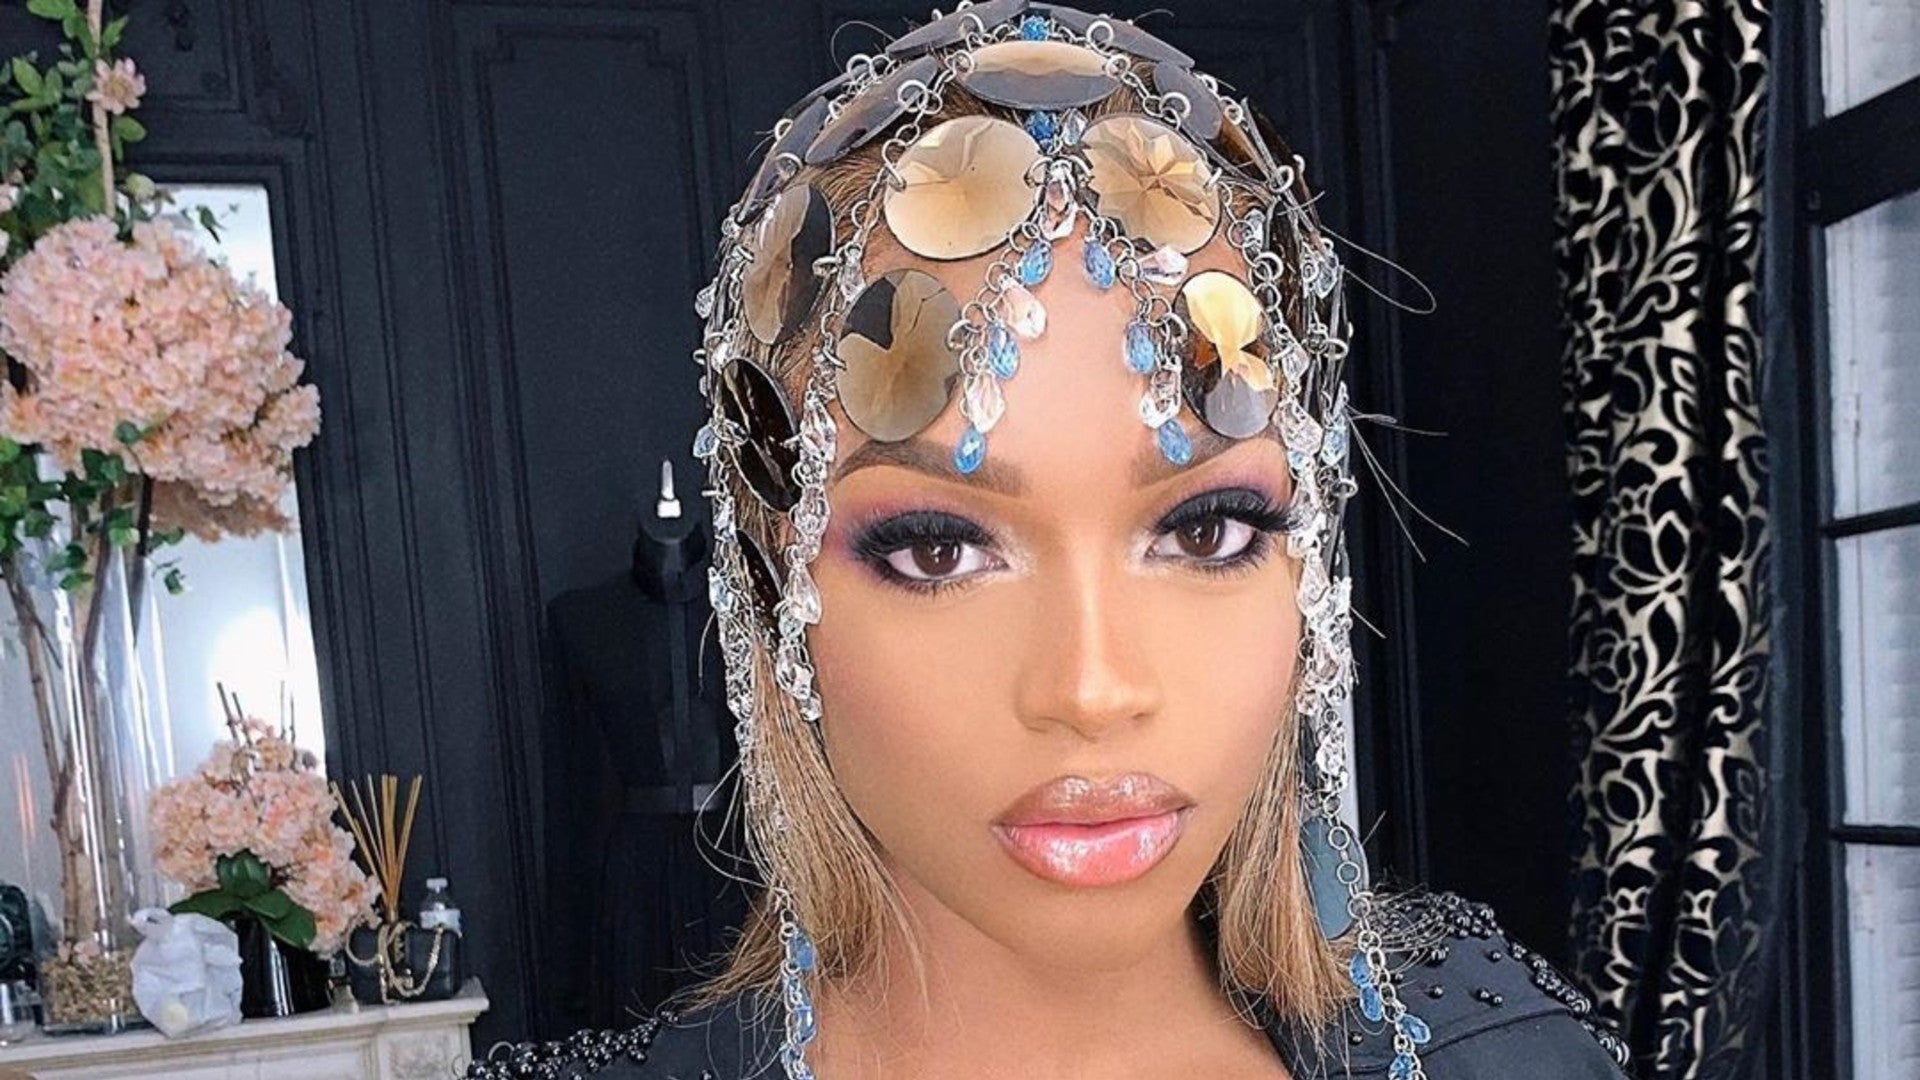 Didi-Stone’s Headpiece Is Giving Us Hair Inspiration